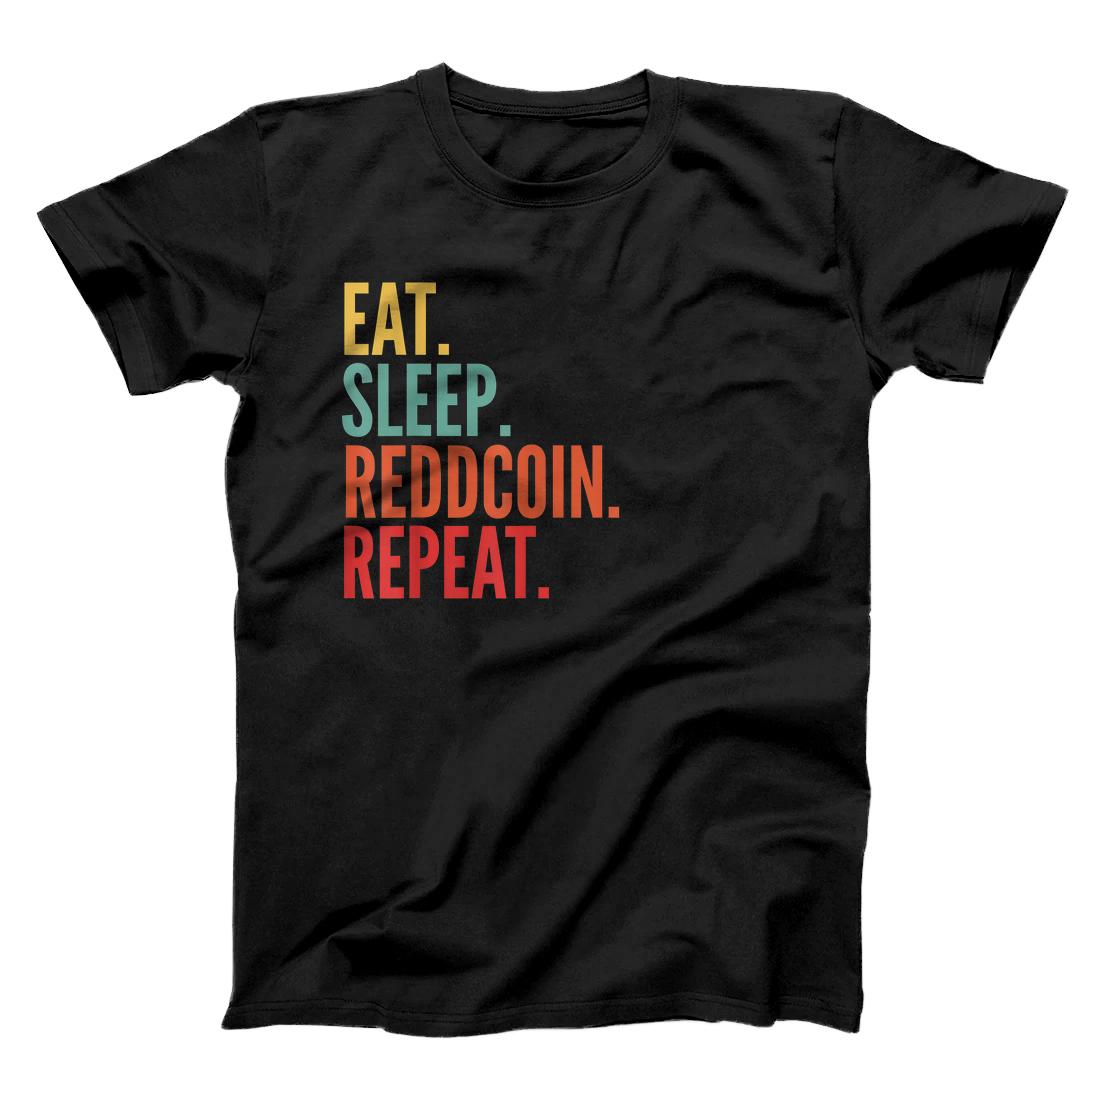 Personalized Reddcoin Crypto, Eat Sleep Reddcoin Repeat T-Shirt